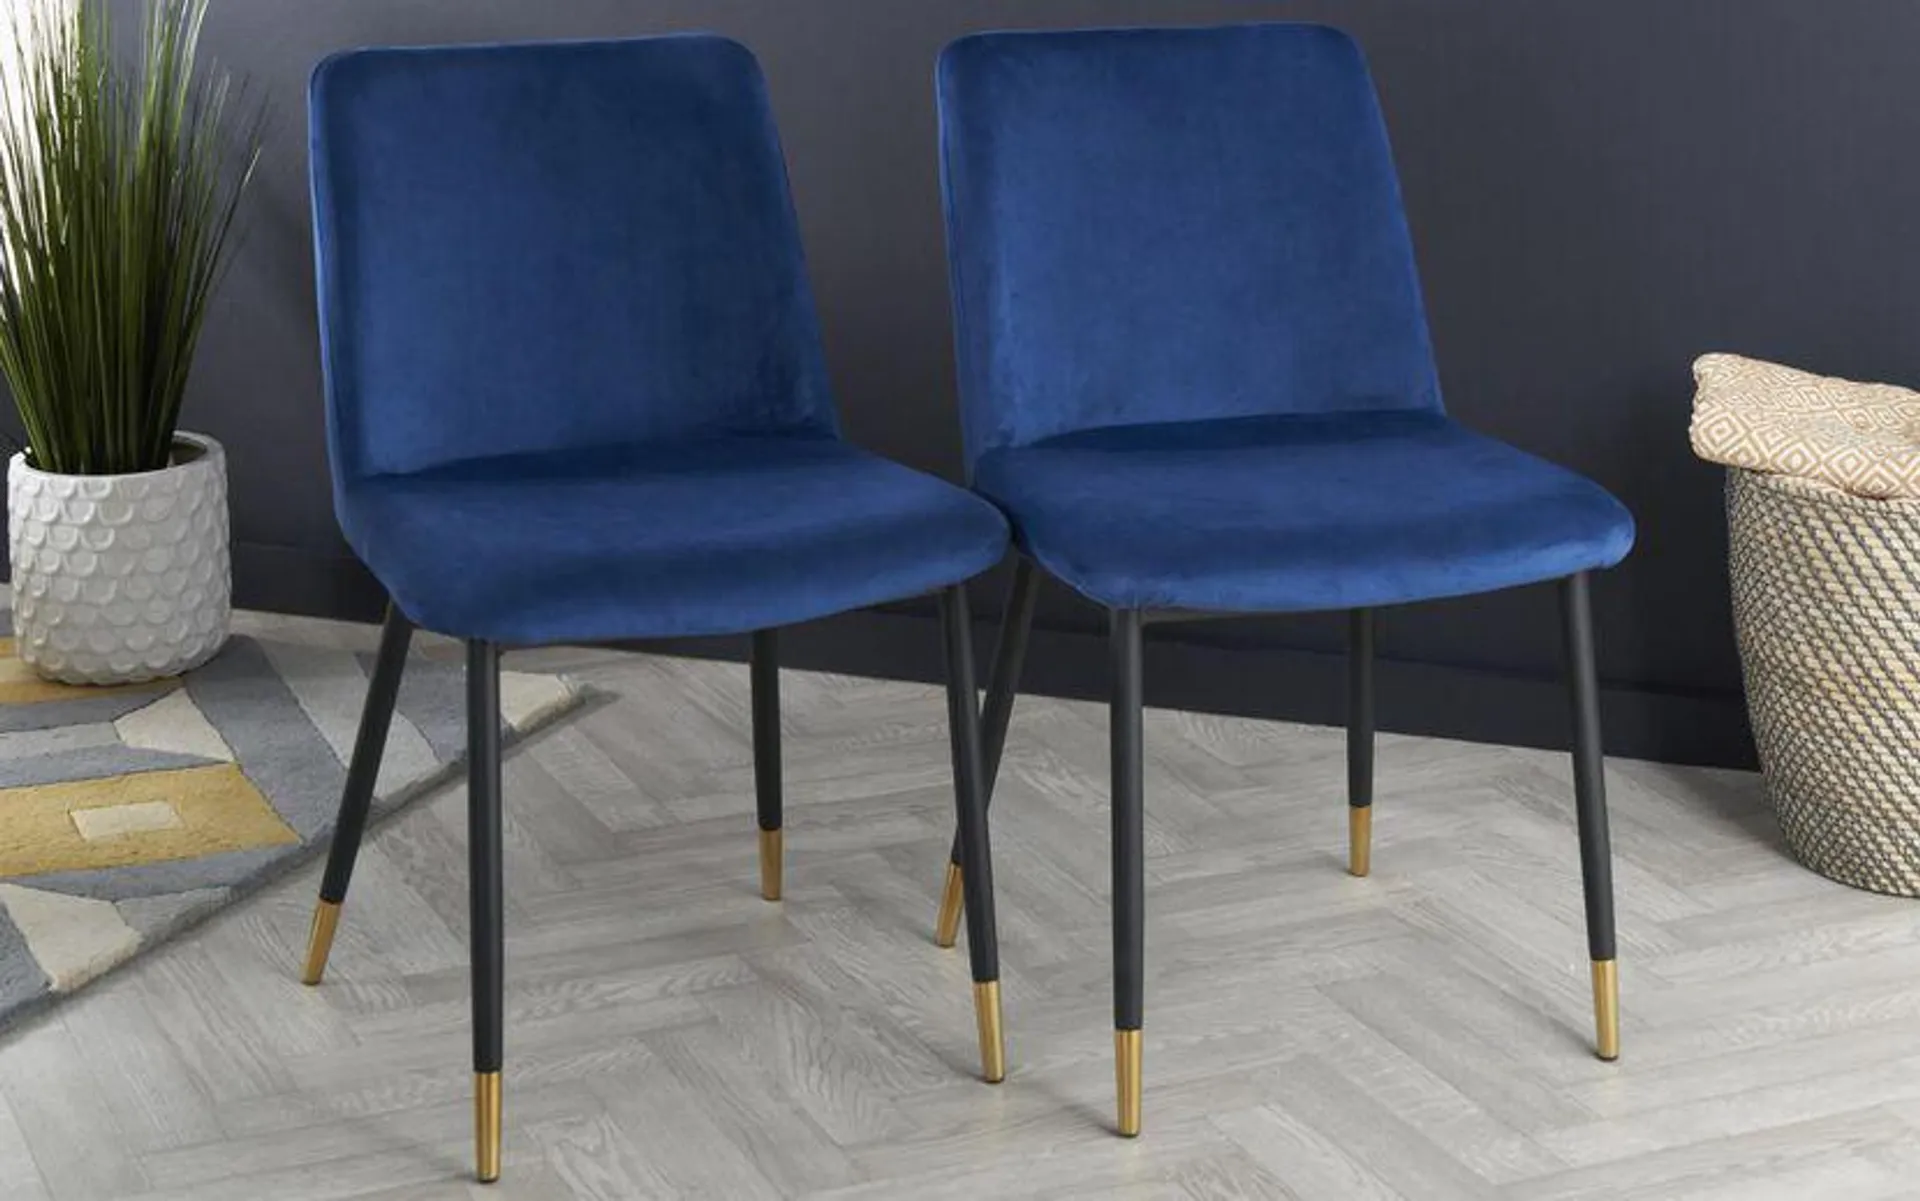 Montero Pair of Blue Dining Chairs